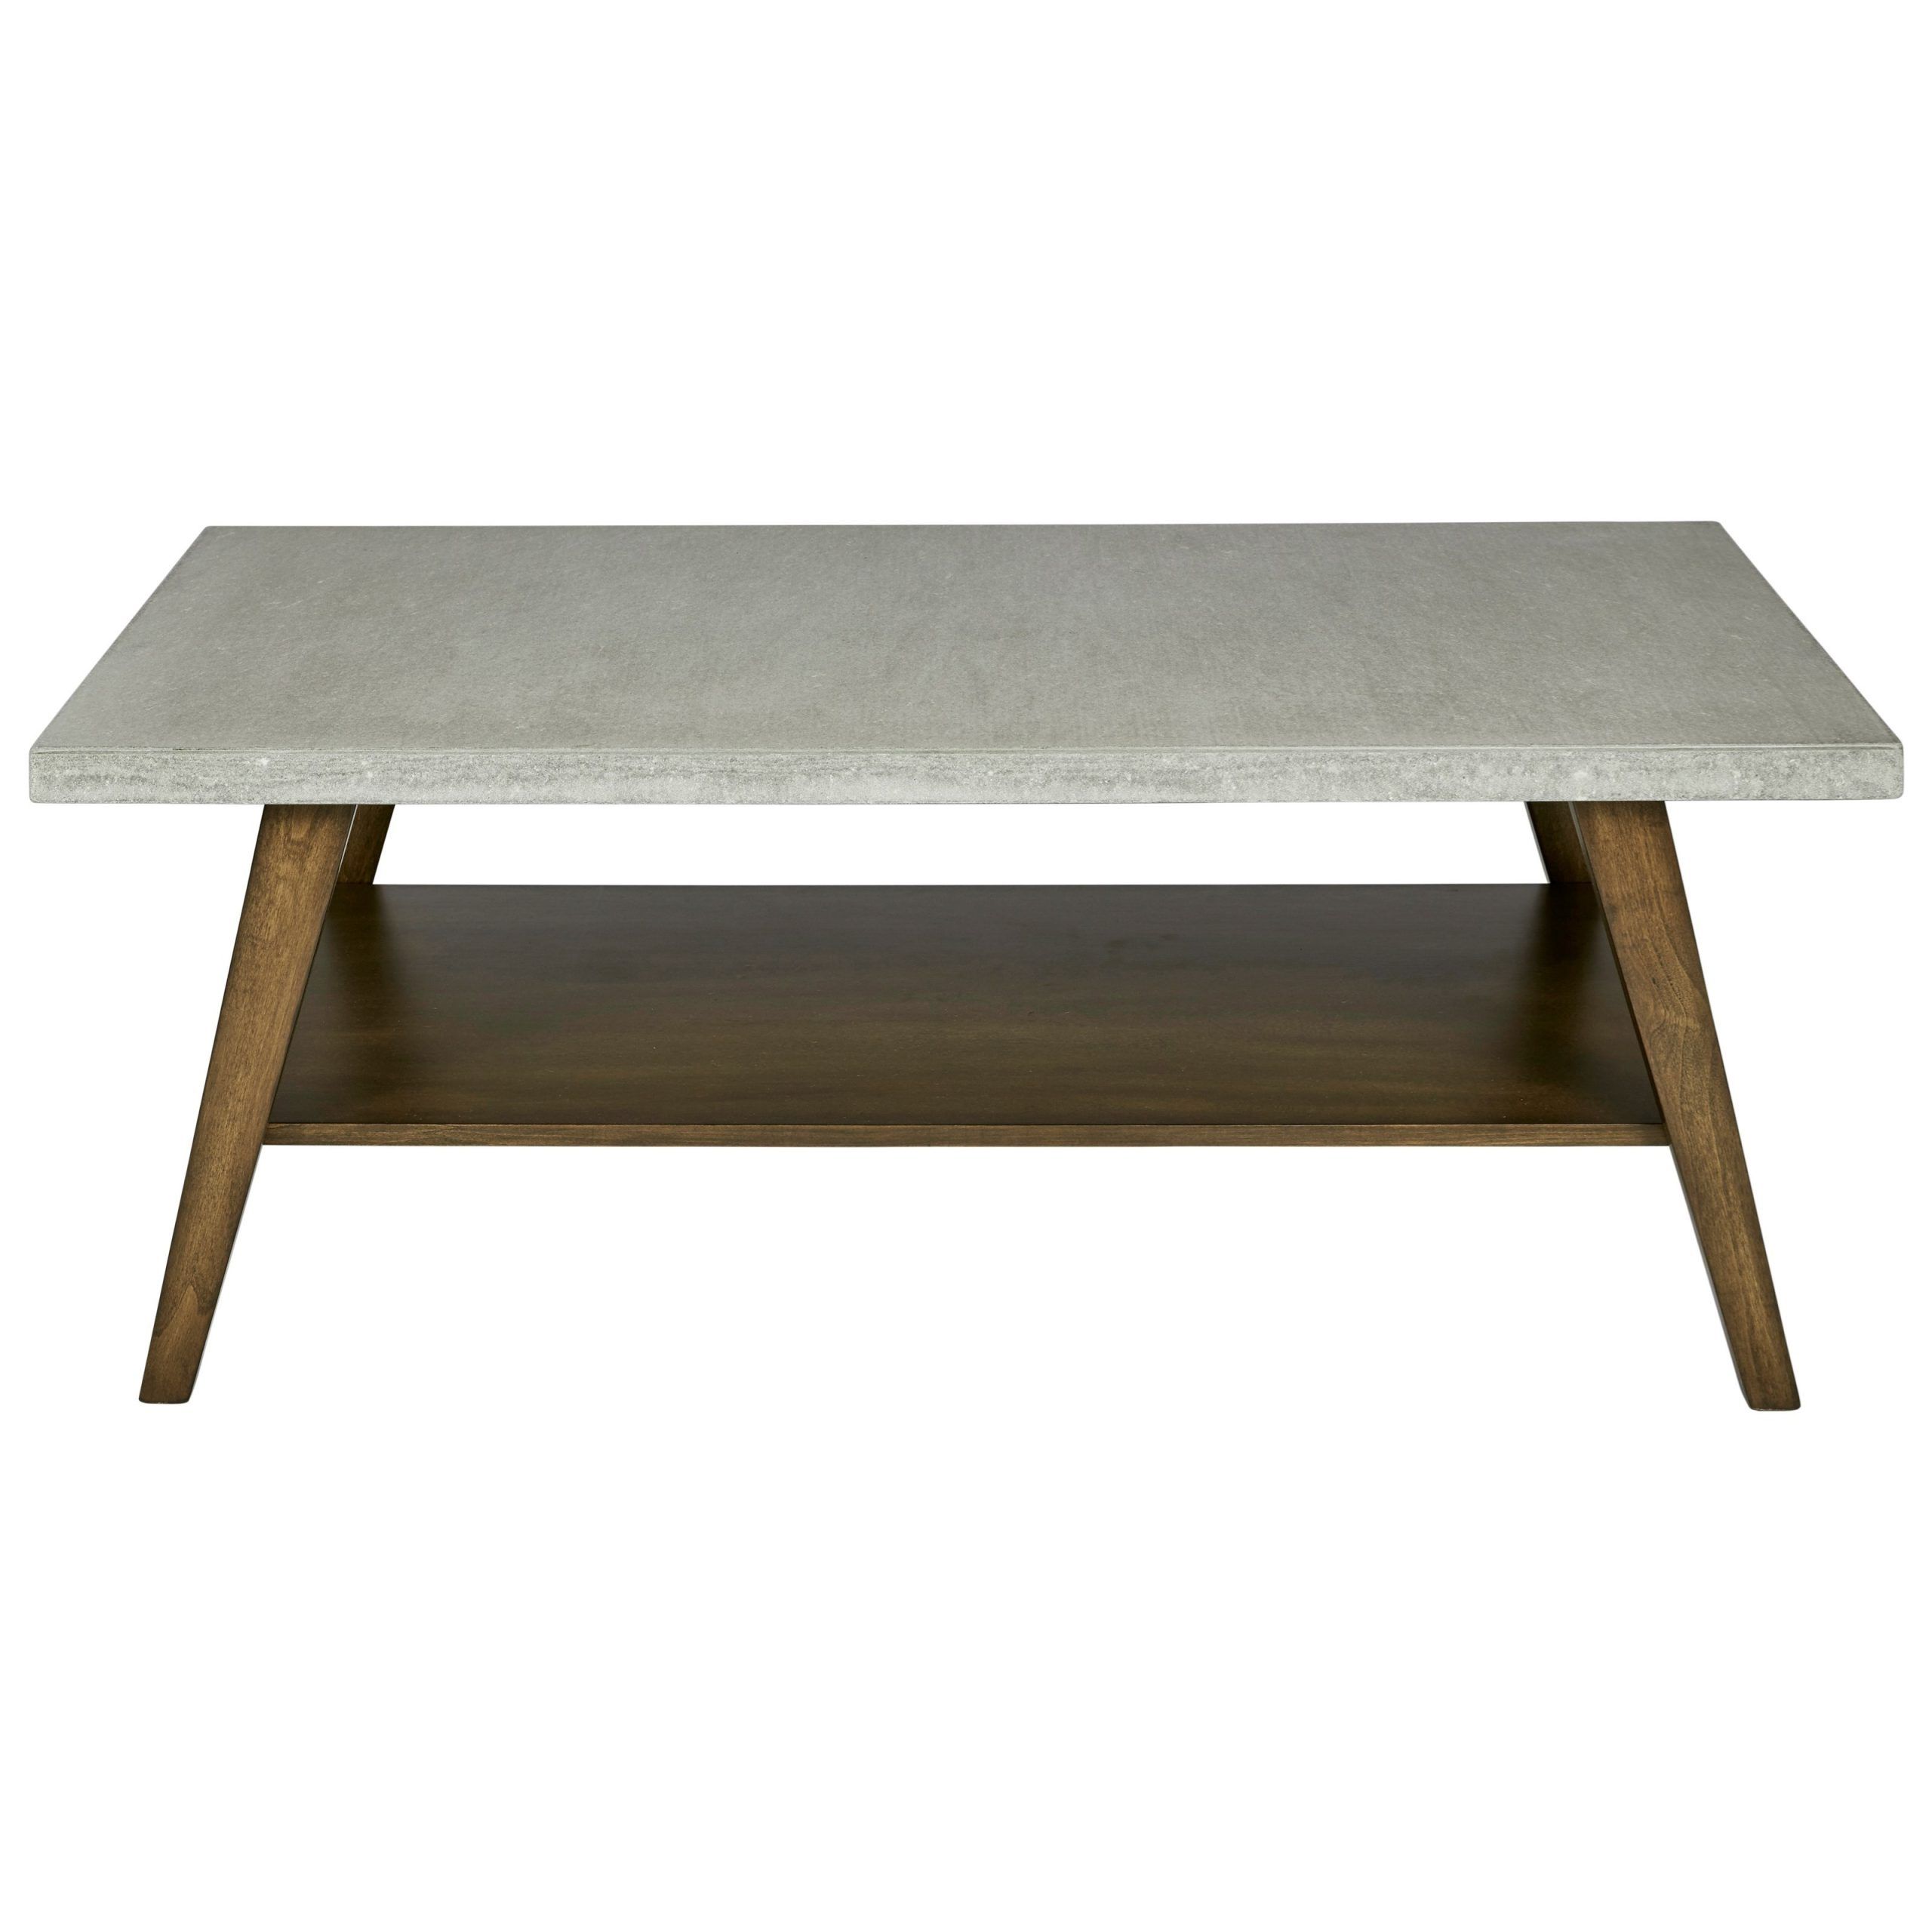 Progressive Furniture Jackson T544 01 Contemporary Rectangular Cocktail  Table With Concrete Table Top | Bullard Furniture | Cocktail/coffee Tables With Regard To Progressive Furniture Cocktail Tables (View 14 of 15)